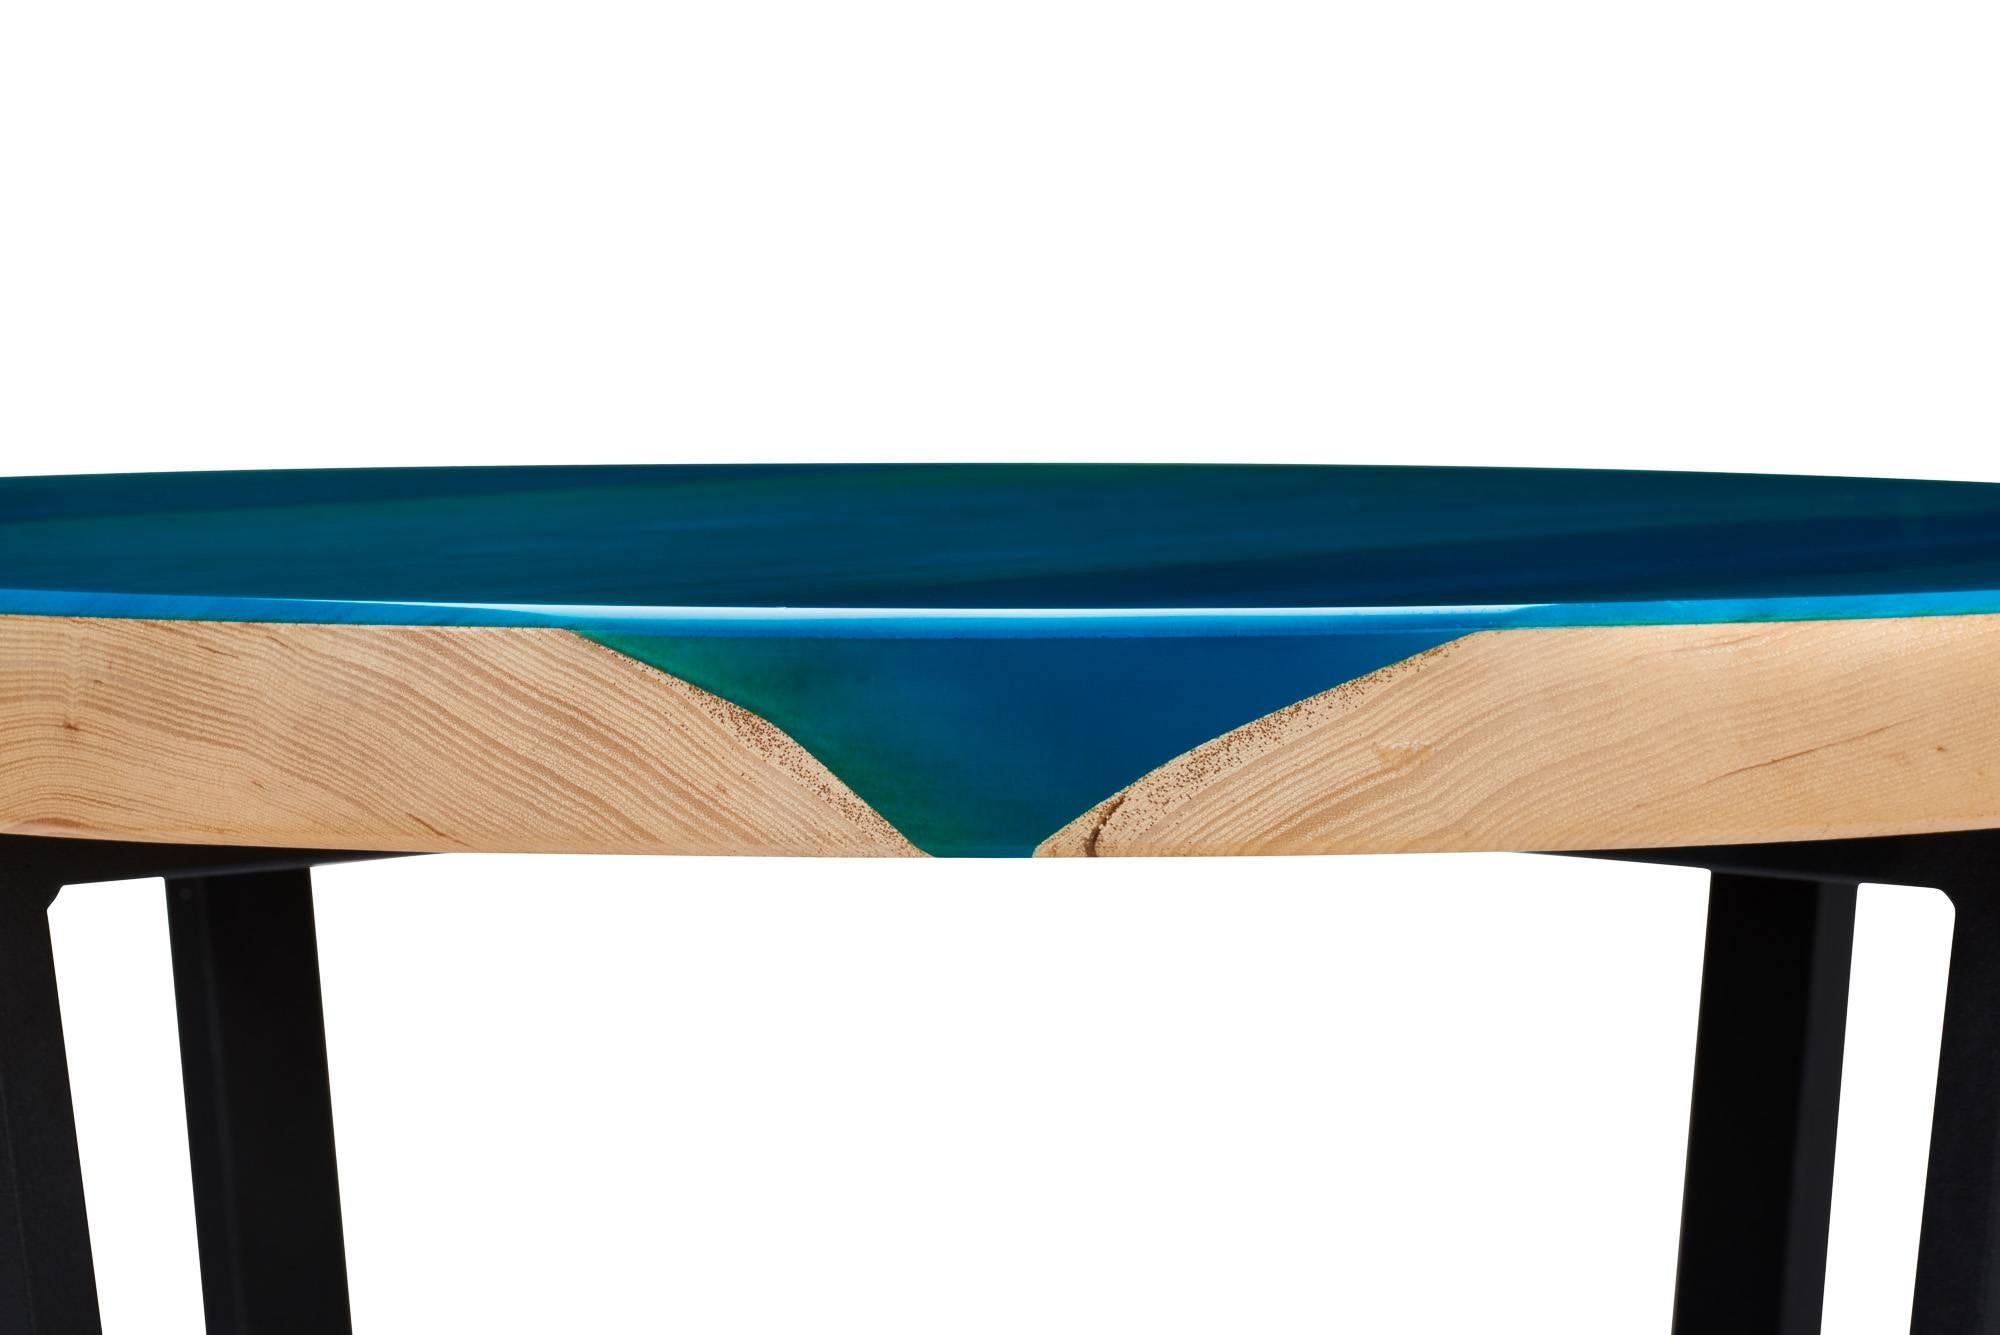 British Contemporary Side Table Ash Glazed with Blue Resin on Powder Coated Steel Base For Sale